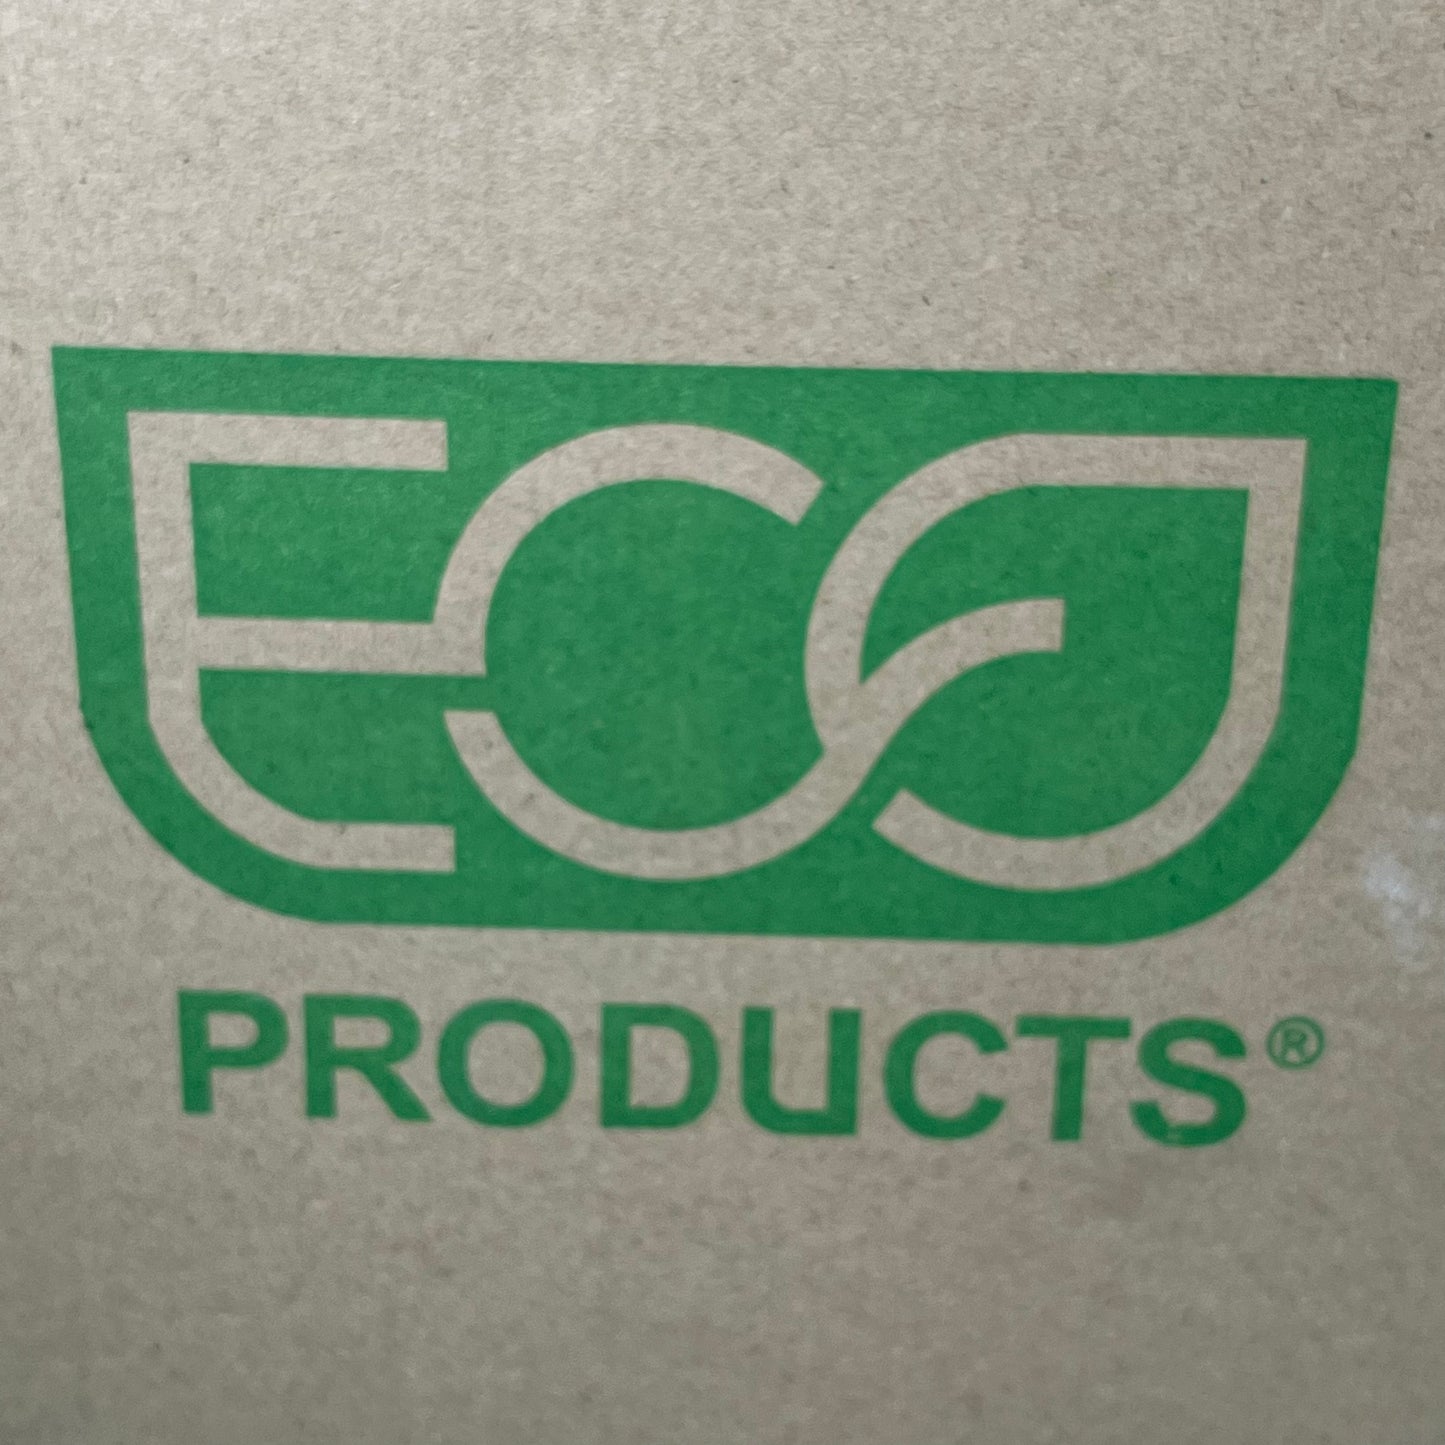 ECO-PRODUCTS 500-PACK! Round 10" Plates Made from Sugarcane Compostable (New)